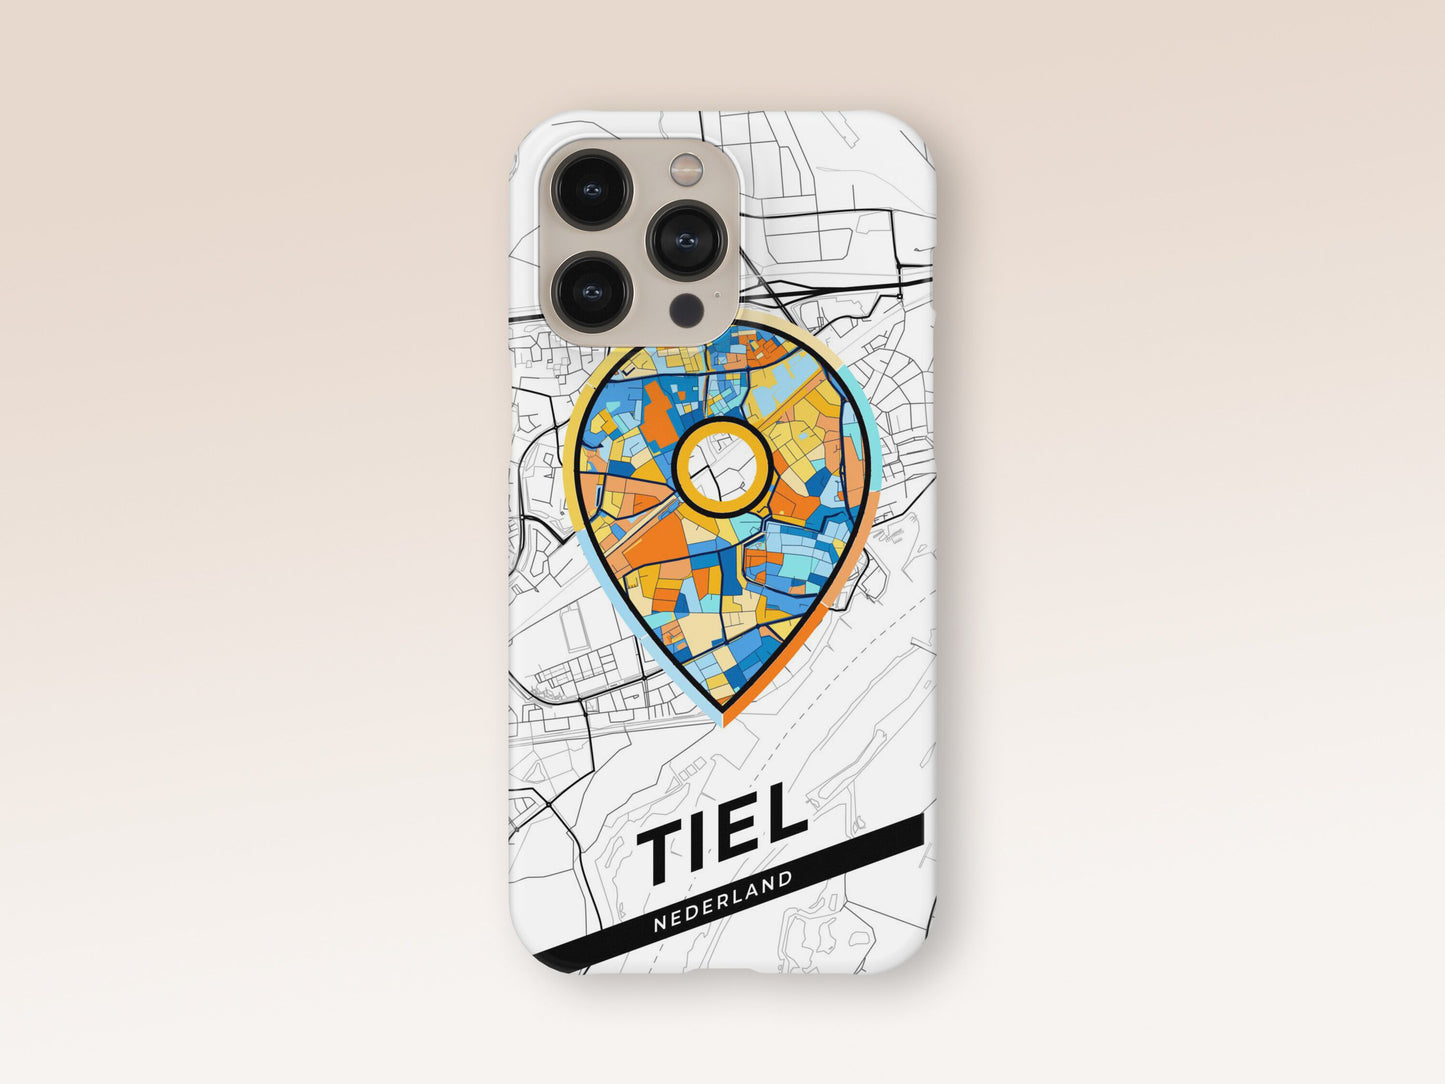 Tiel Netherlands slim phone case with colorful icon 1